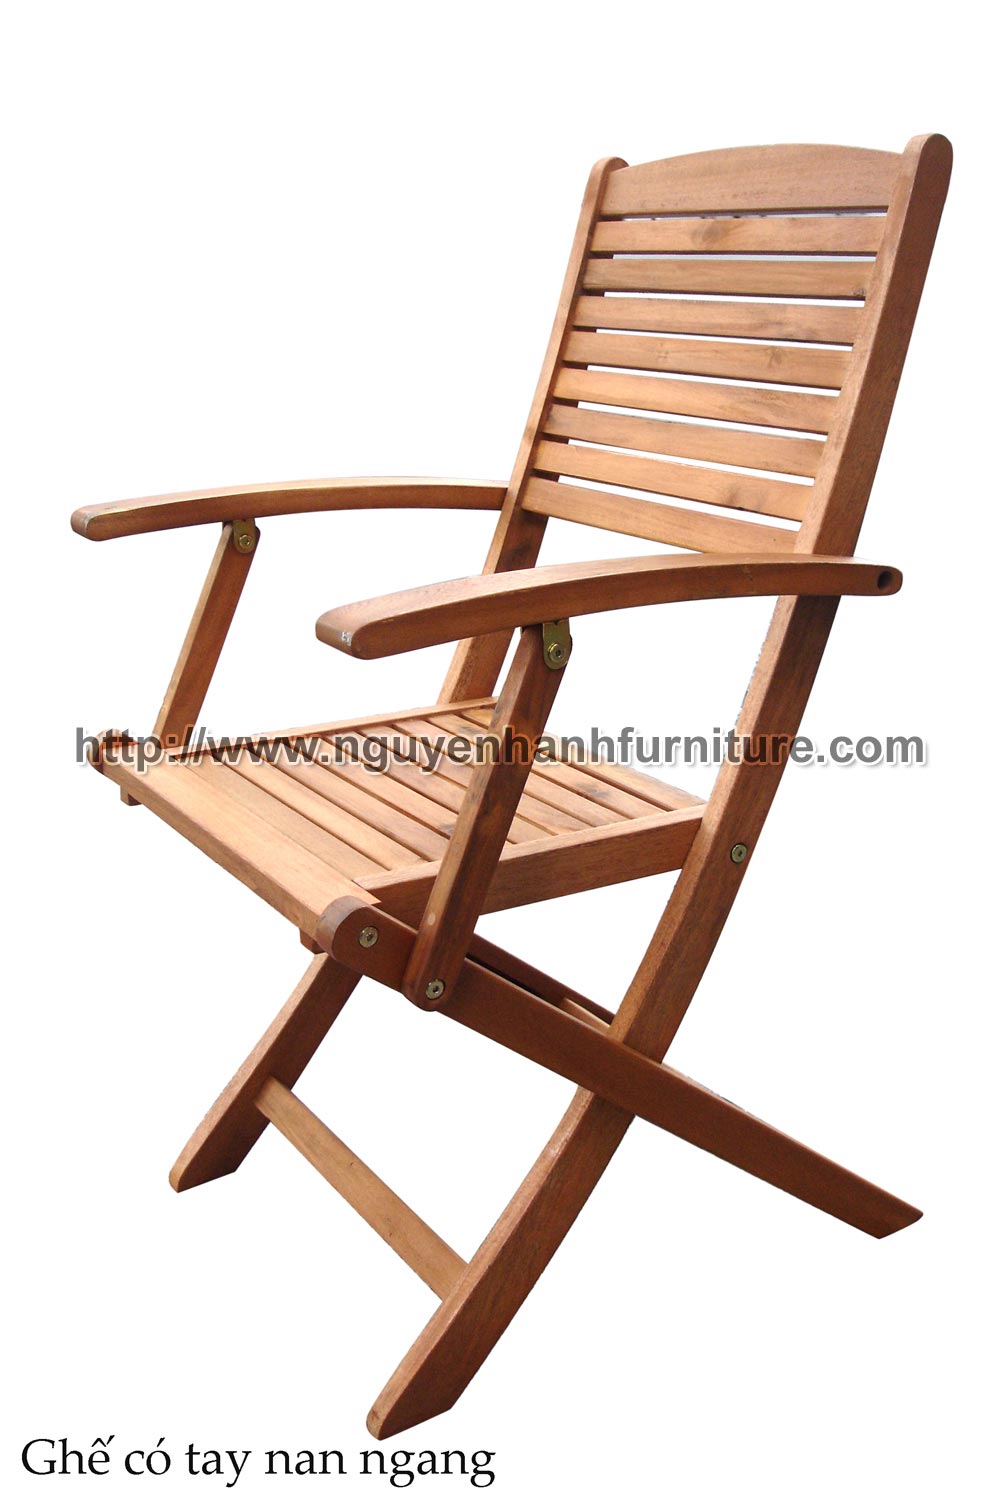 Name product: Chair with horizontal blades armrest 